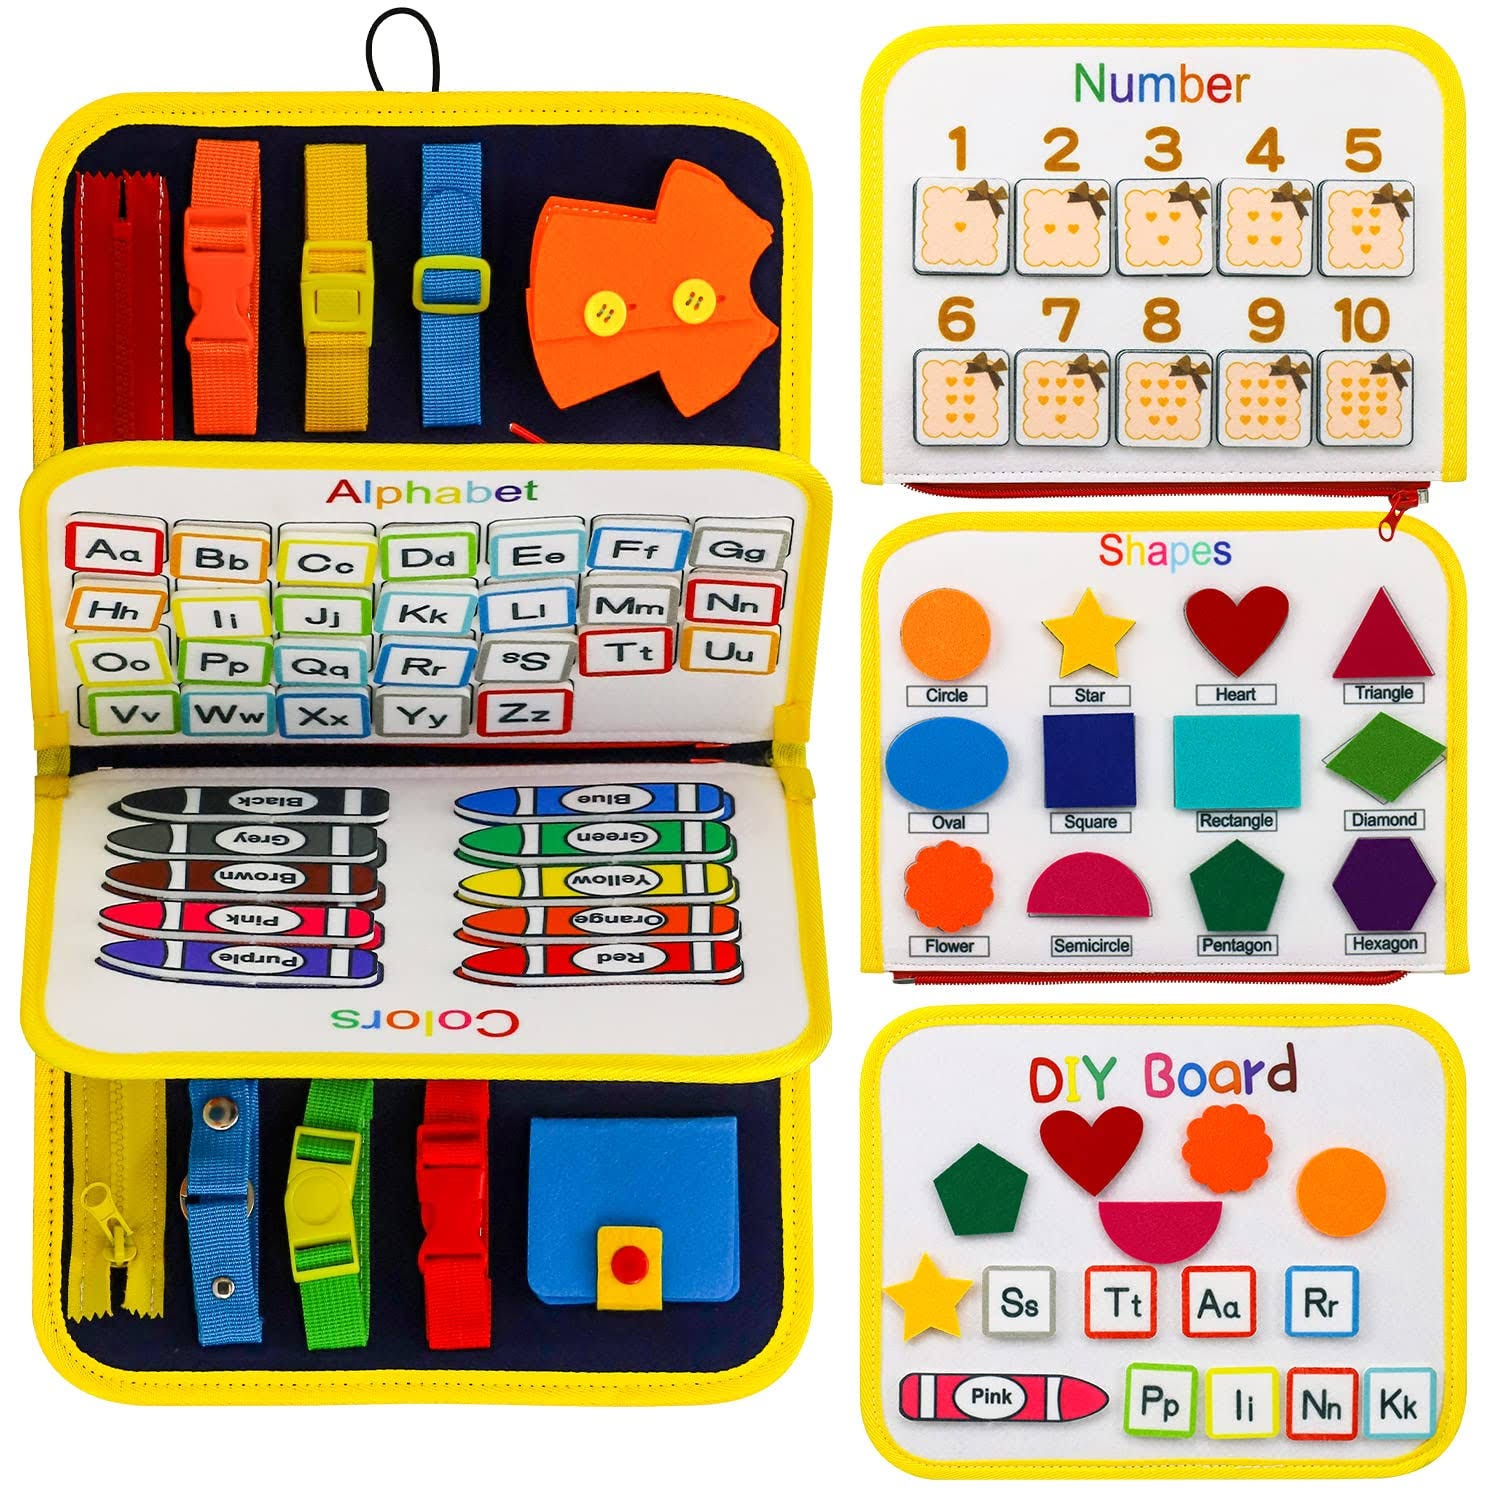 Upgraded Montessori Busy Board for Toddlers with Colorful Learning Activities | Image